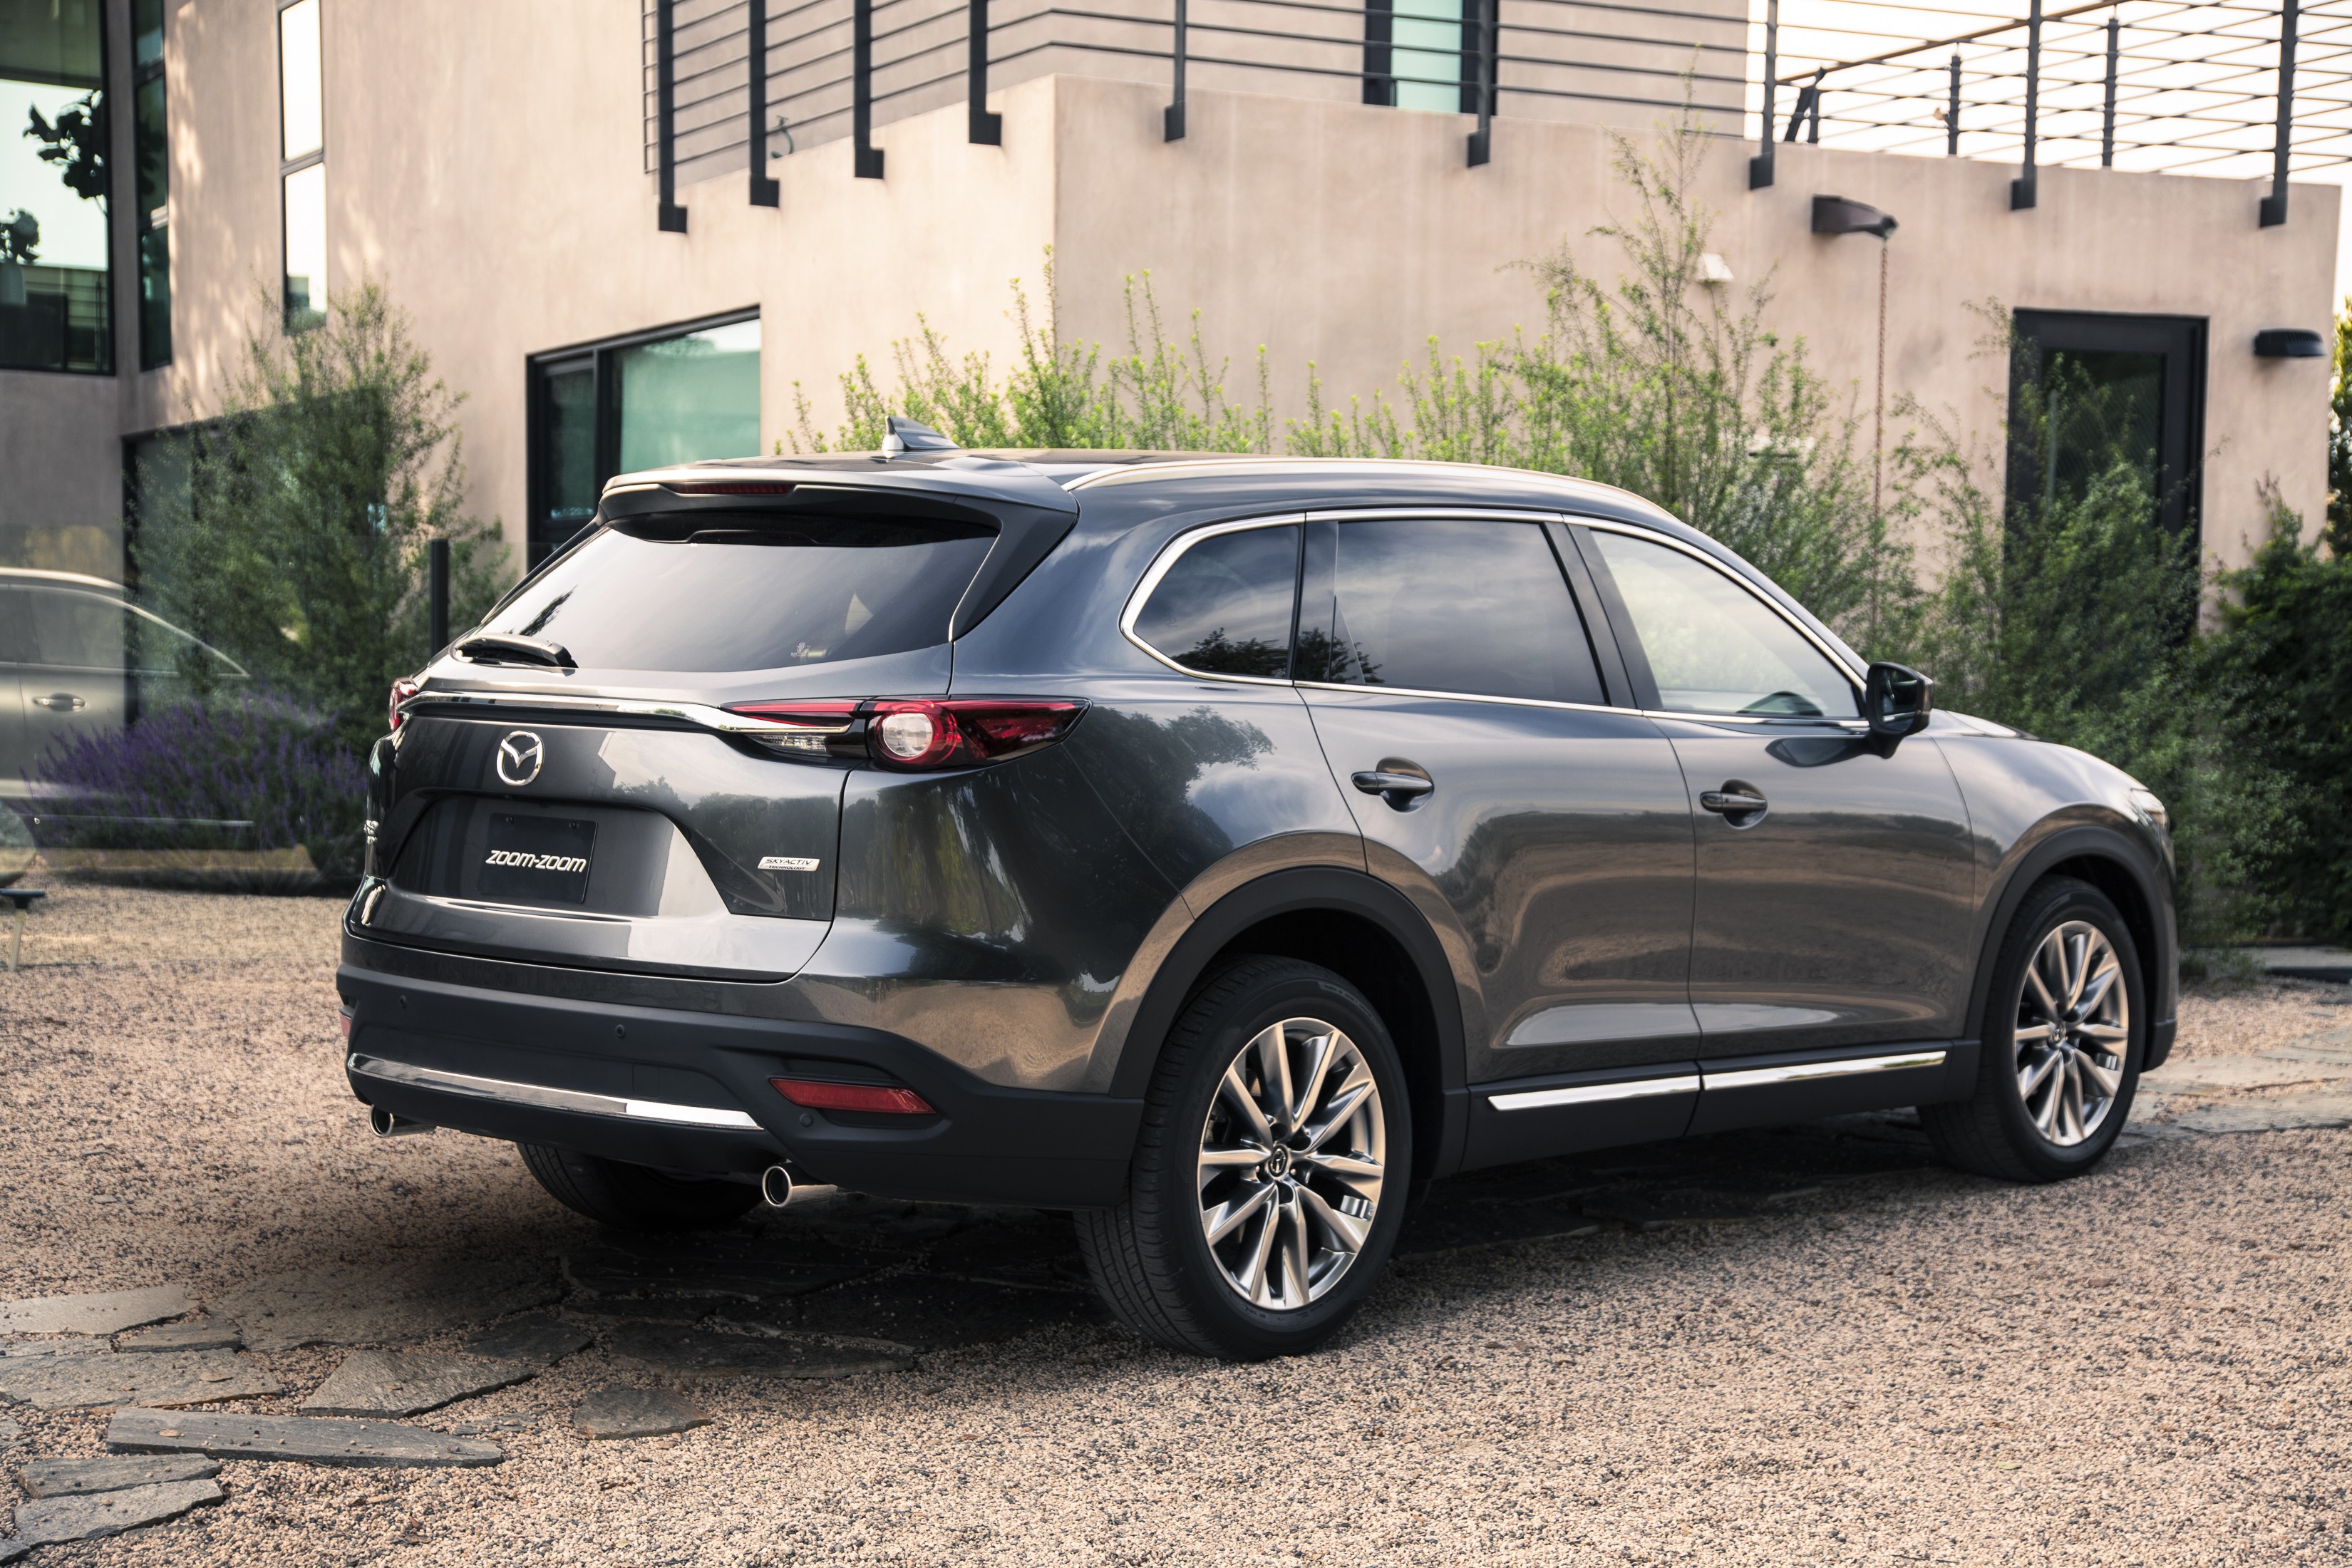 2017 Mazda CX-9 Sneak Peek from the Los Angeles Auto Show ...